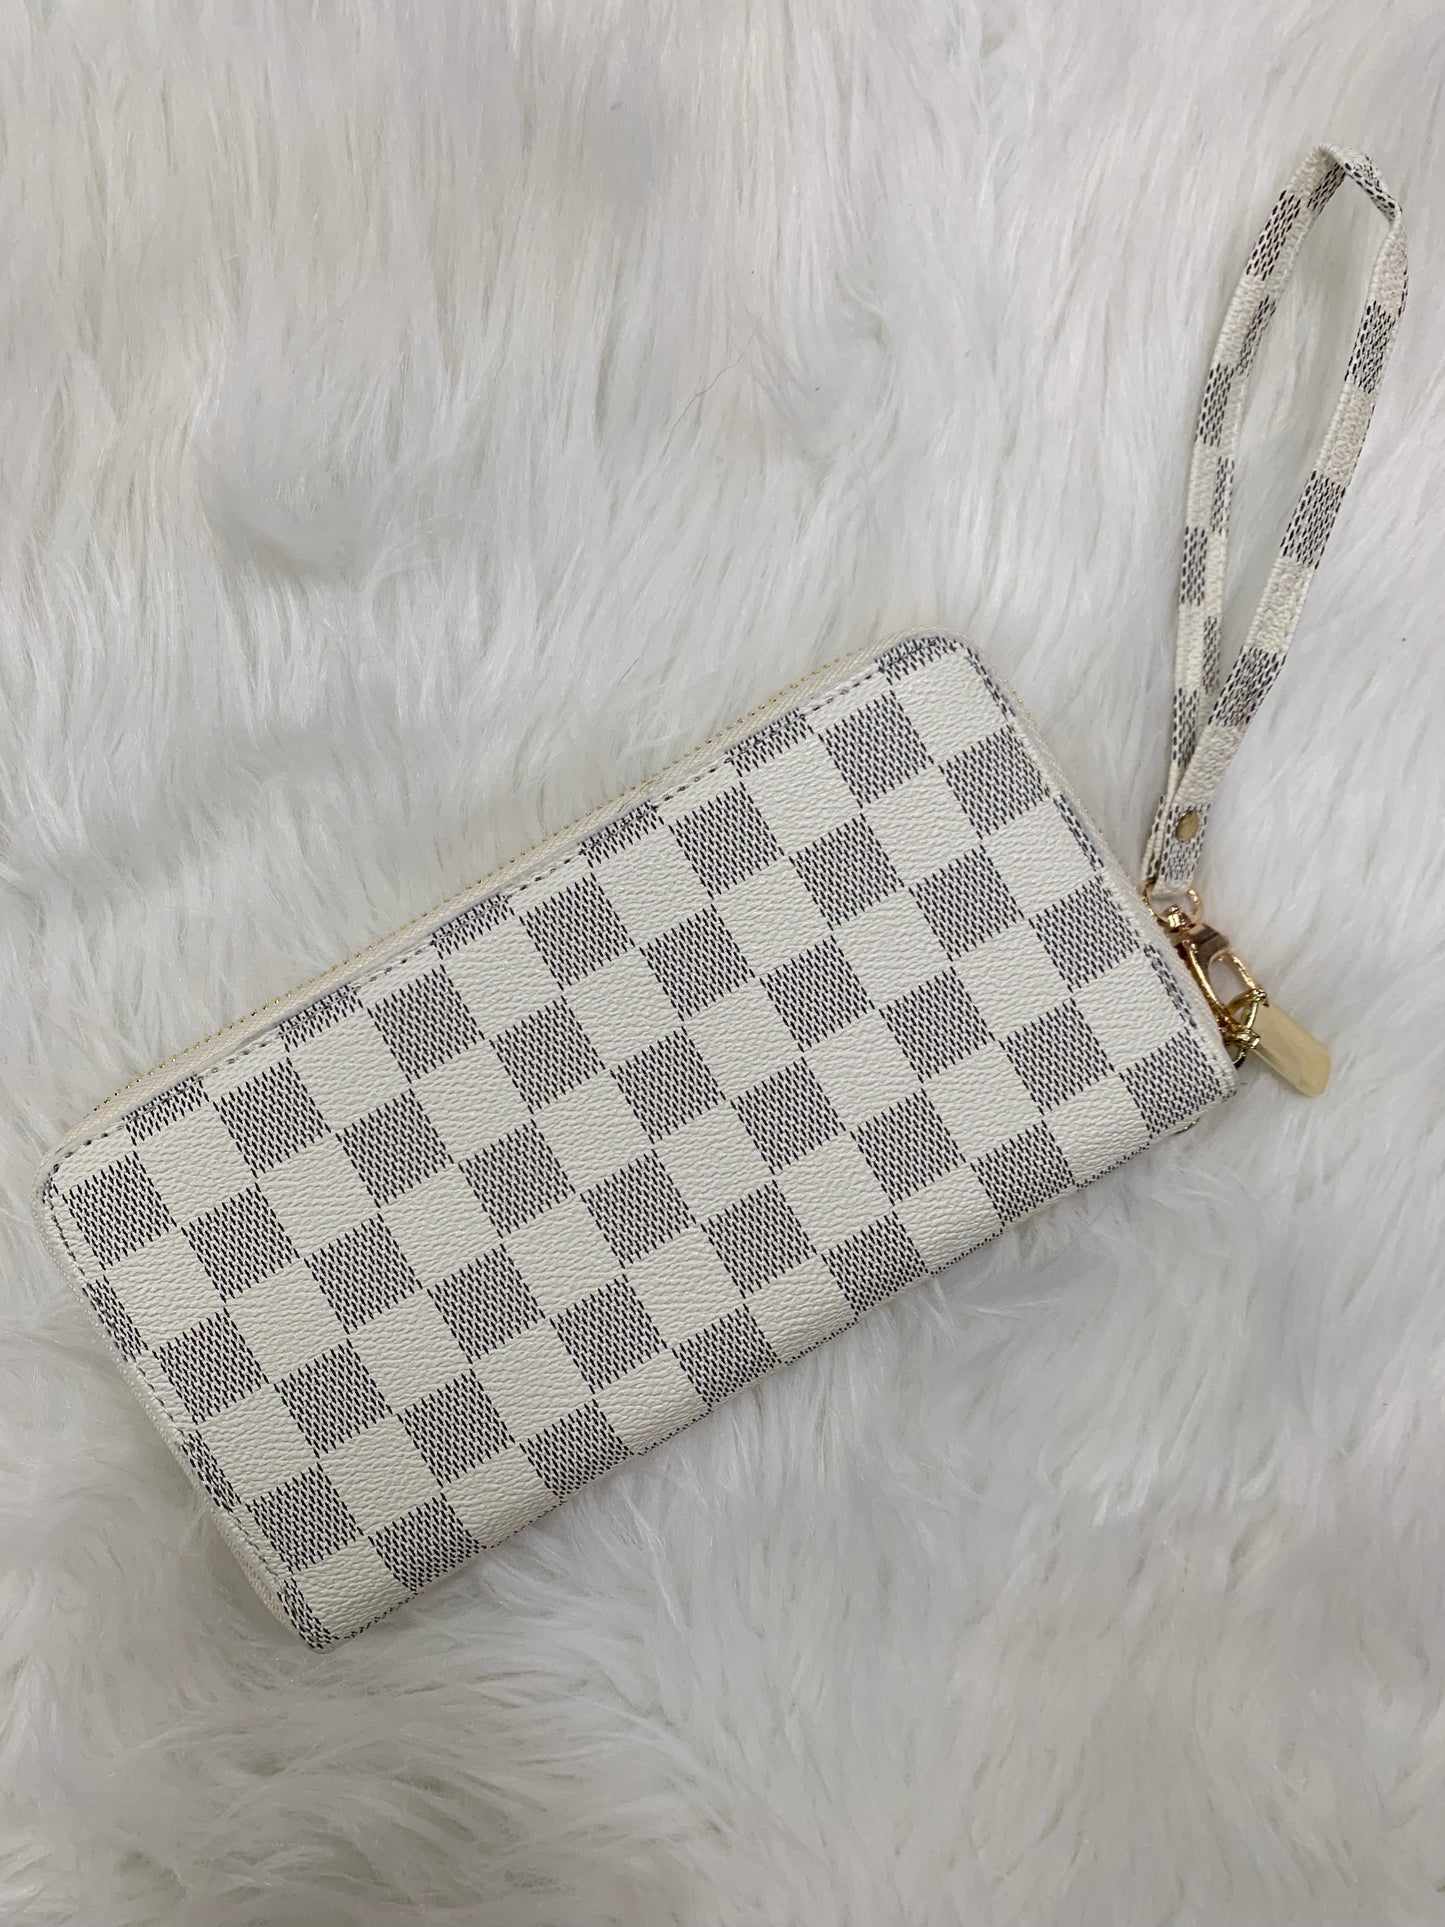 Tory Checkered Wristlet Wallet